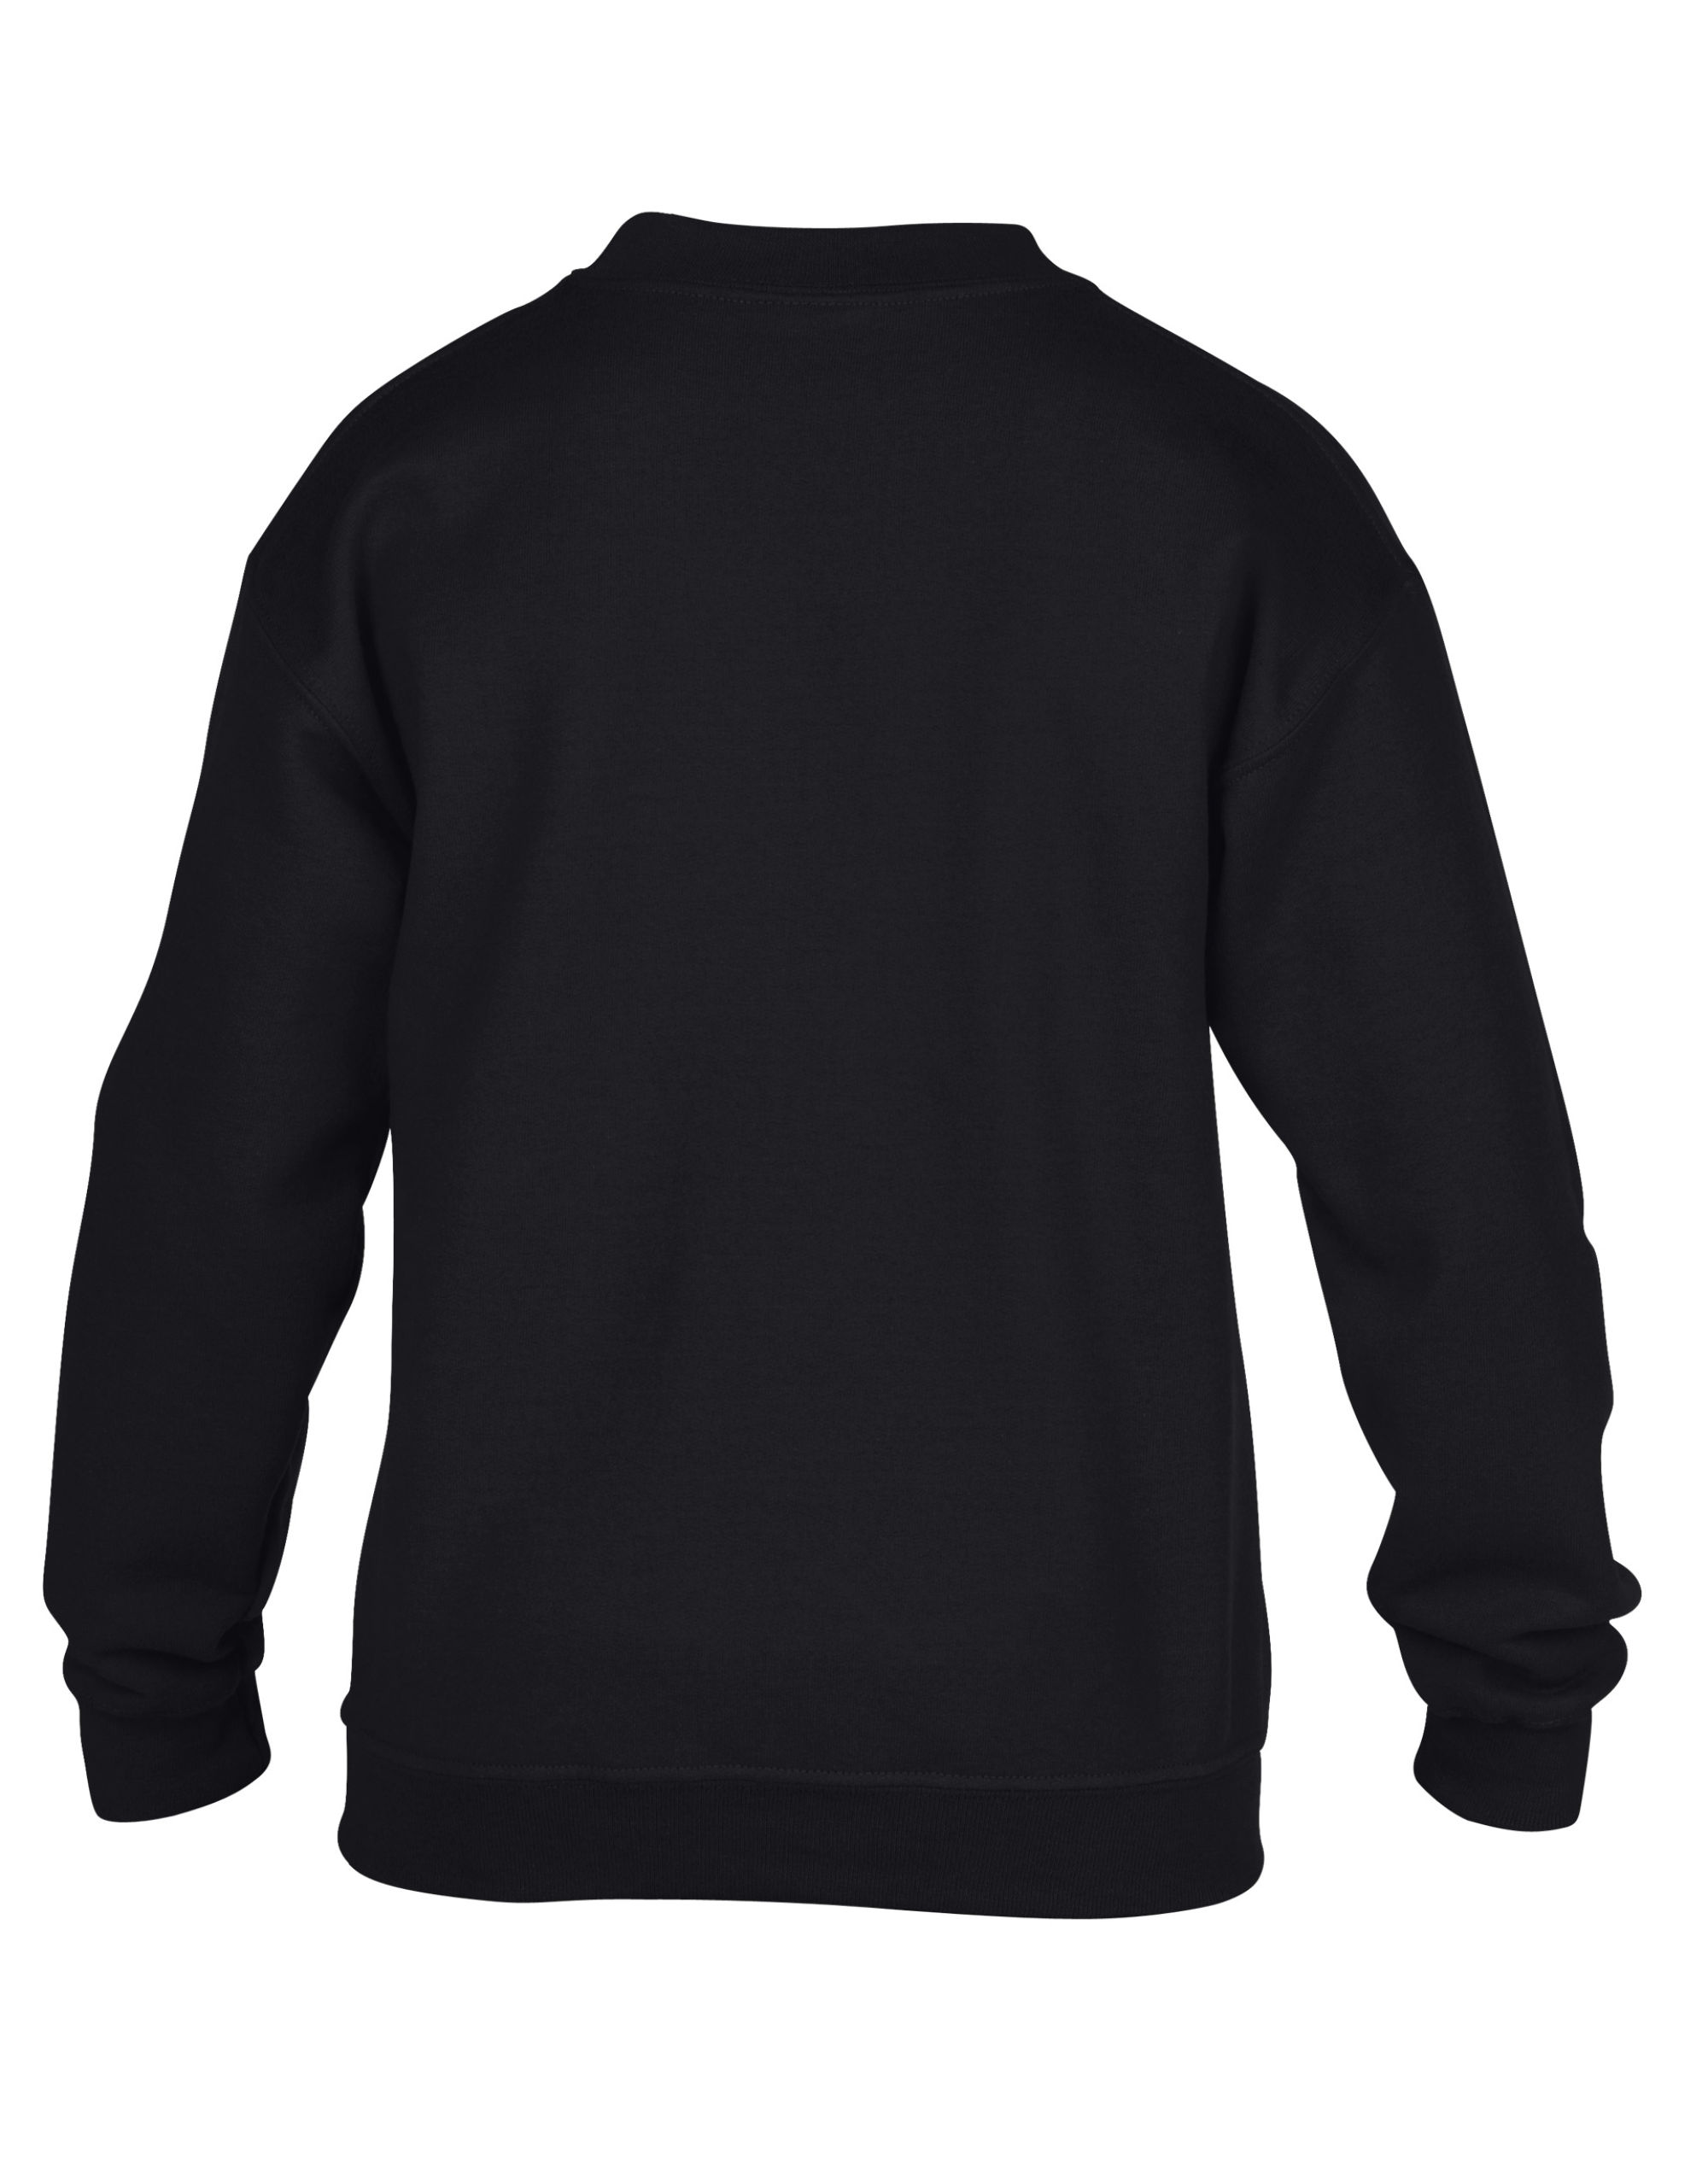 Picture of Heavy Blend™ Youth Crewneck Sweatshirt